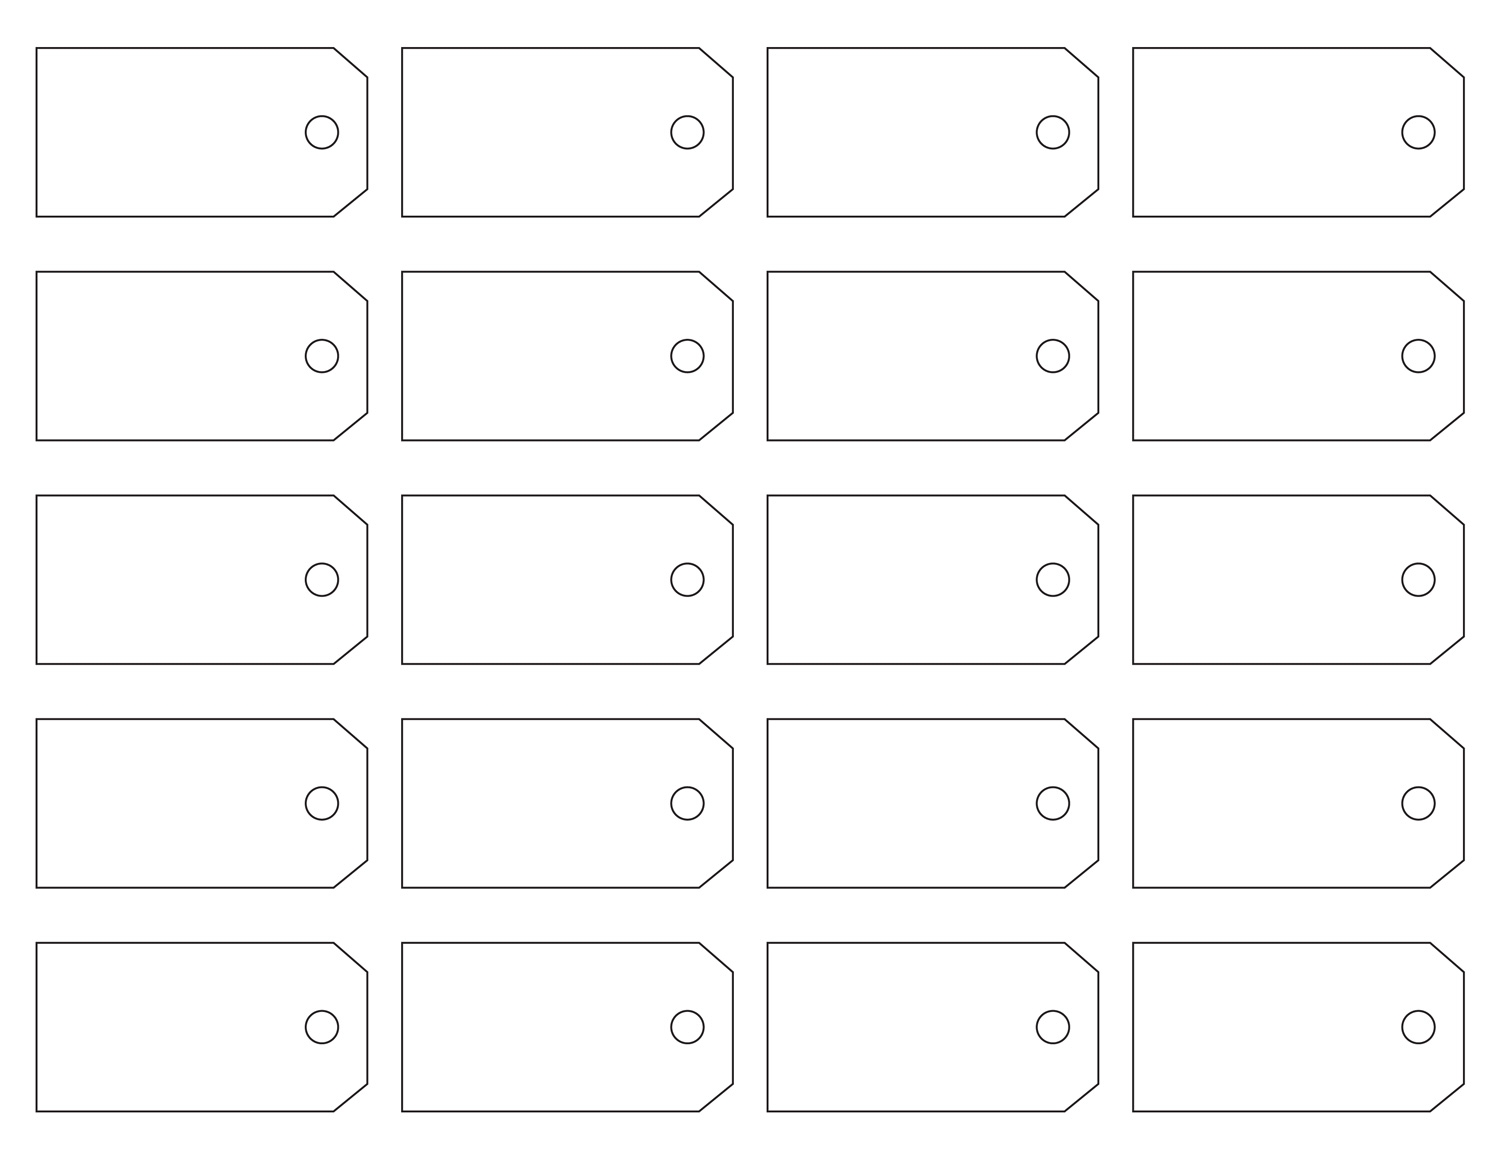 Printable Price Tag Templates Make Your Own Price Tag Labels